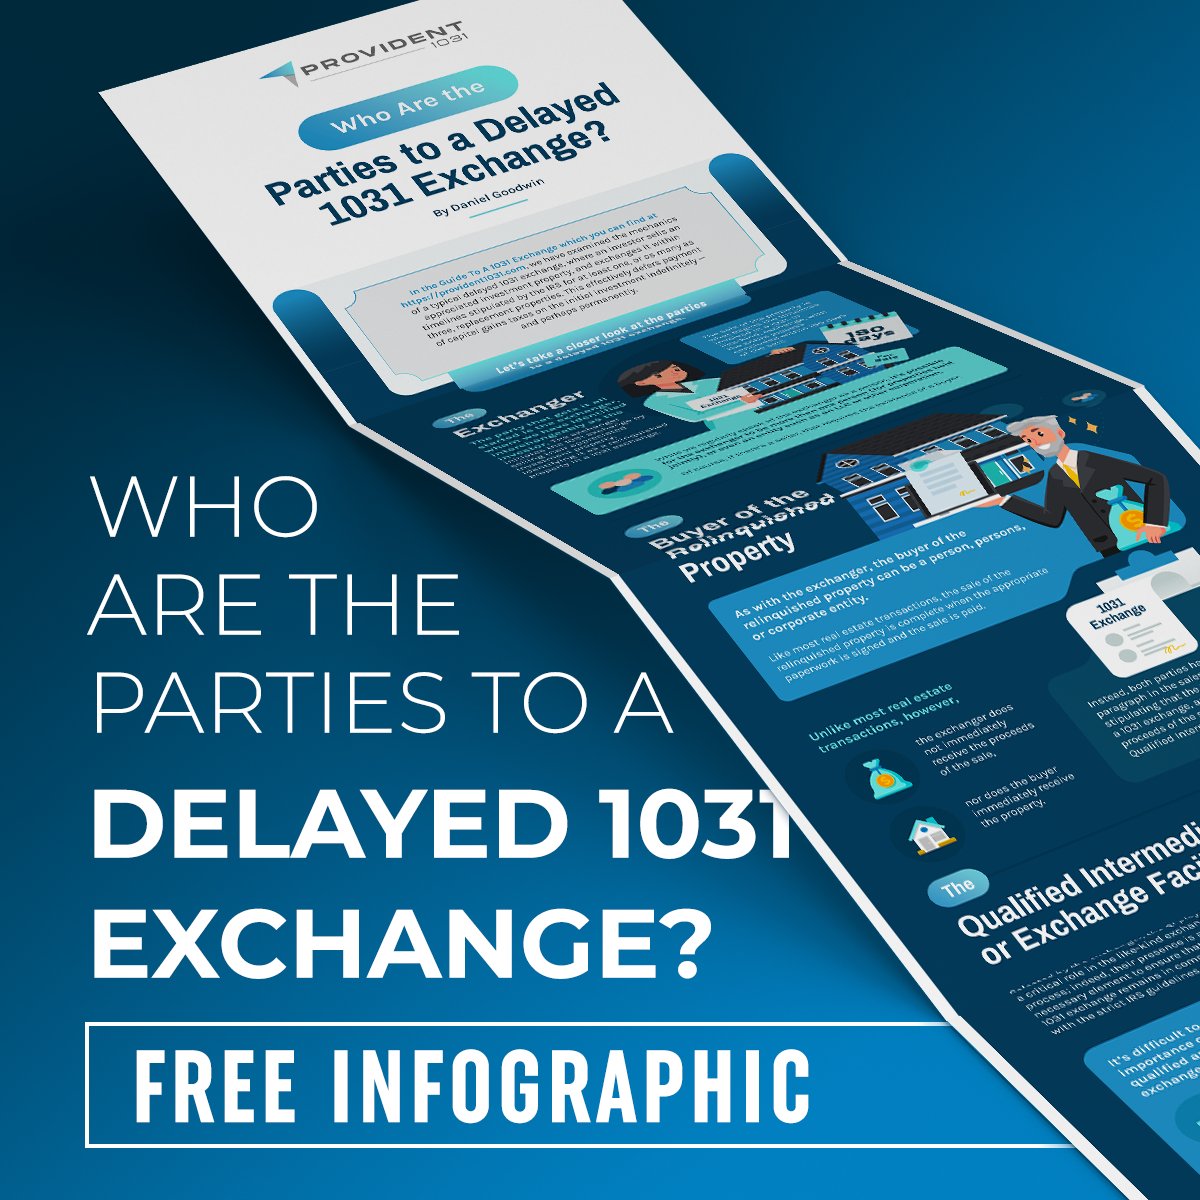 FREE Infographic: Who Are The Parties To A Delayed 1031 Exchange? - bit.ly/44a1zQG

#QOZ #QualifiedOpportunityZone #1031Exchange #OpportunityZones #InvestmentStrategies #Provident1031 #DanielGoodwin #WealthStrategies #QOZInvesting #Delayed1031Exchange